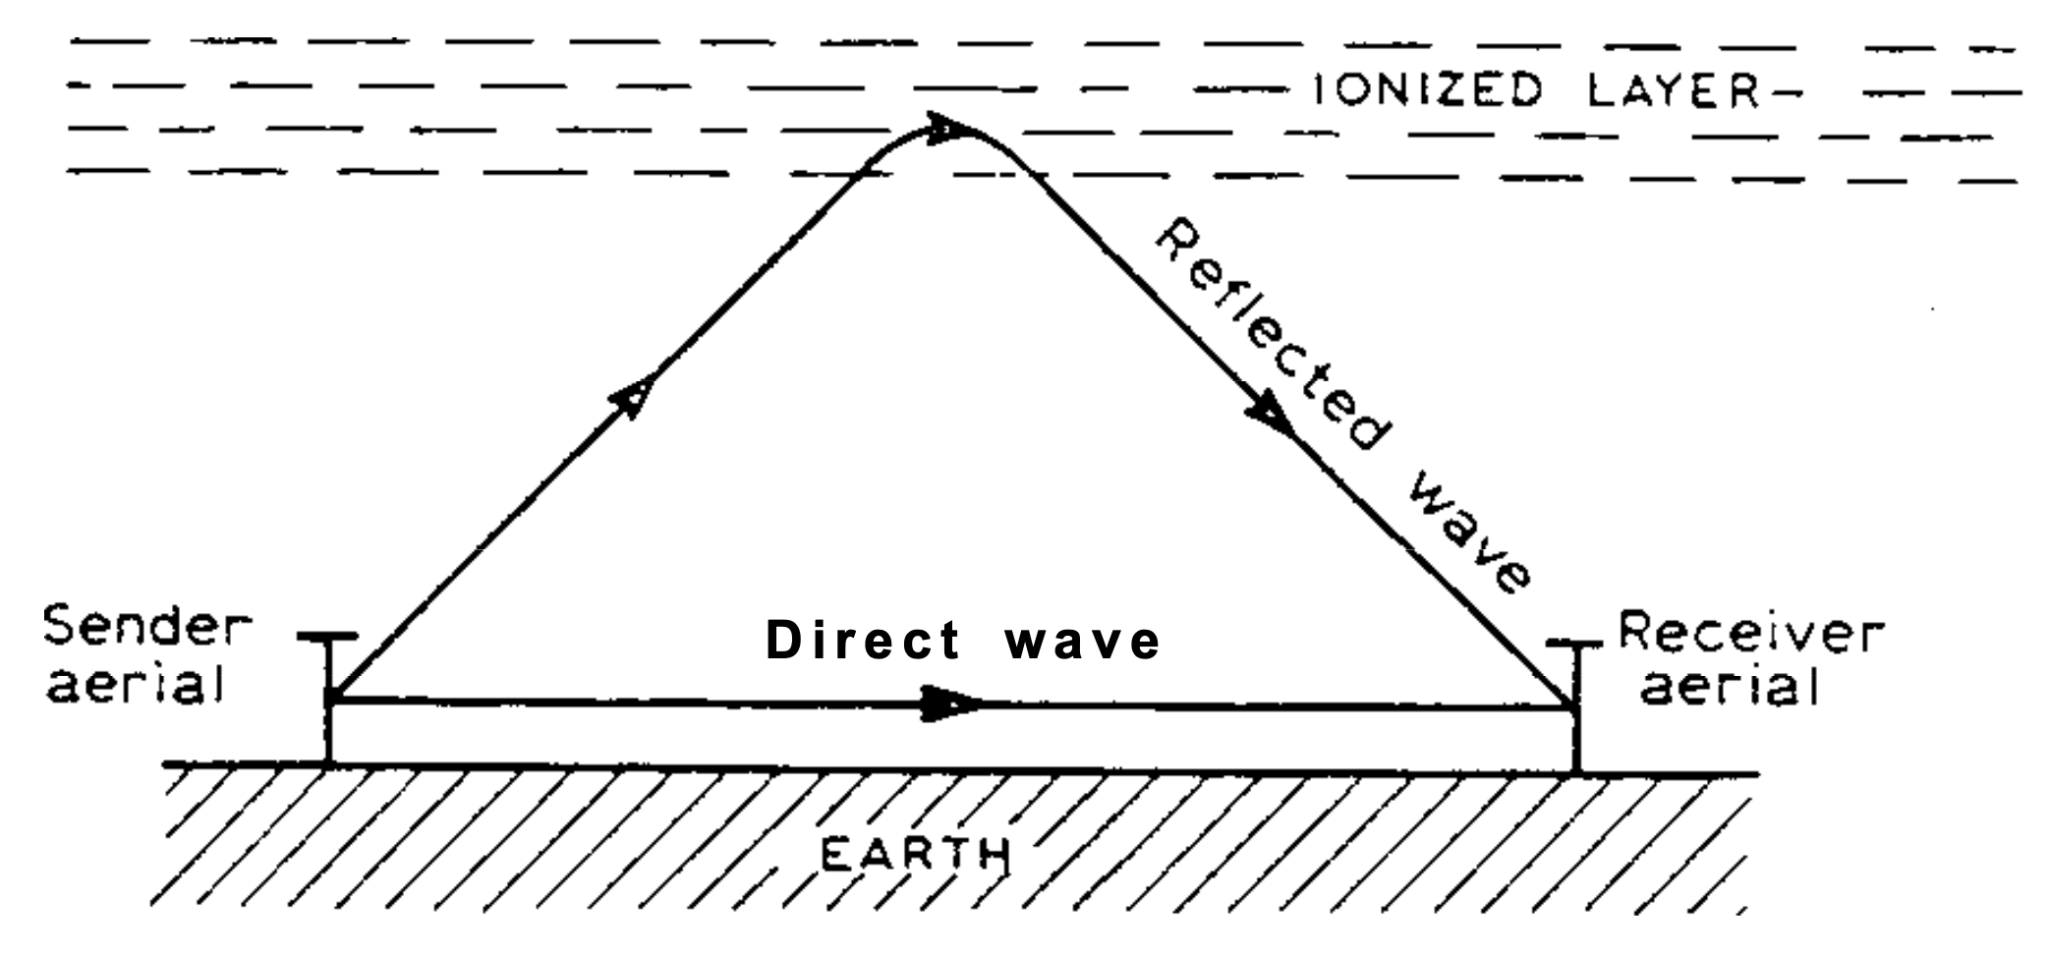 A diagram shows arrows forming a triangle above Earth. One arrow, labeled Direct wave, forms the base of the triangle and points horizontally from left to right between the words Sender aerial on the left and Receiver aerial on the right. Arrows forming the left and right sides of the triangle are labeled Reflected Wave. The peak of the triangle passes through horizontal lines at the top labeled ionized layer.